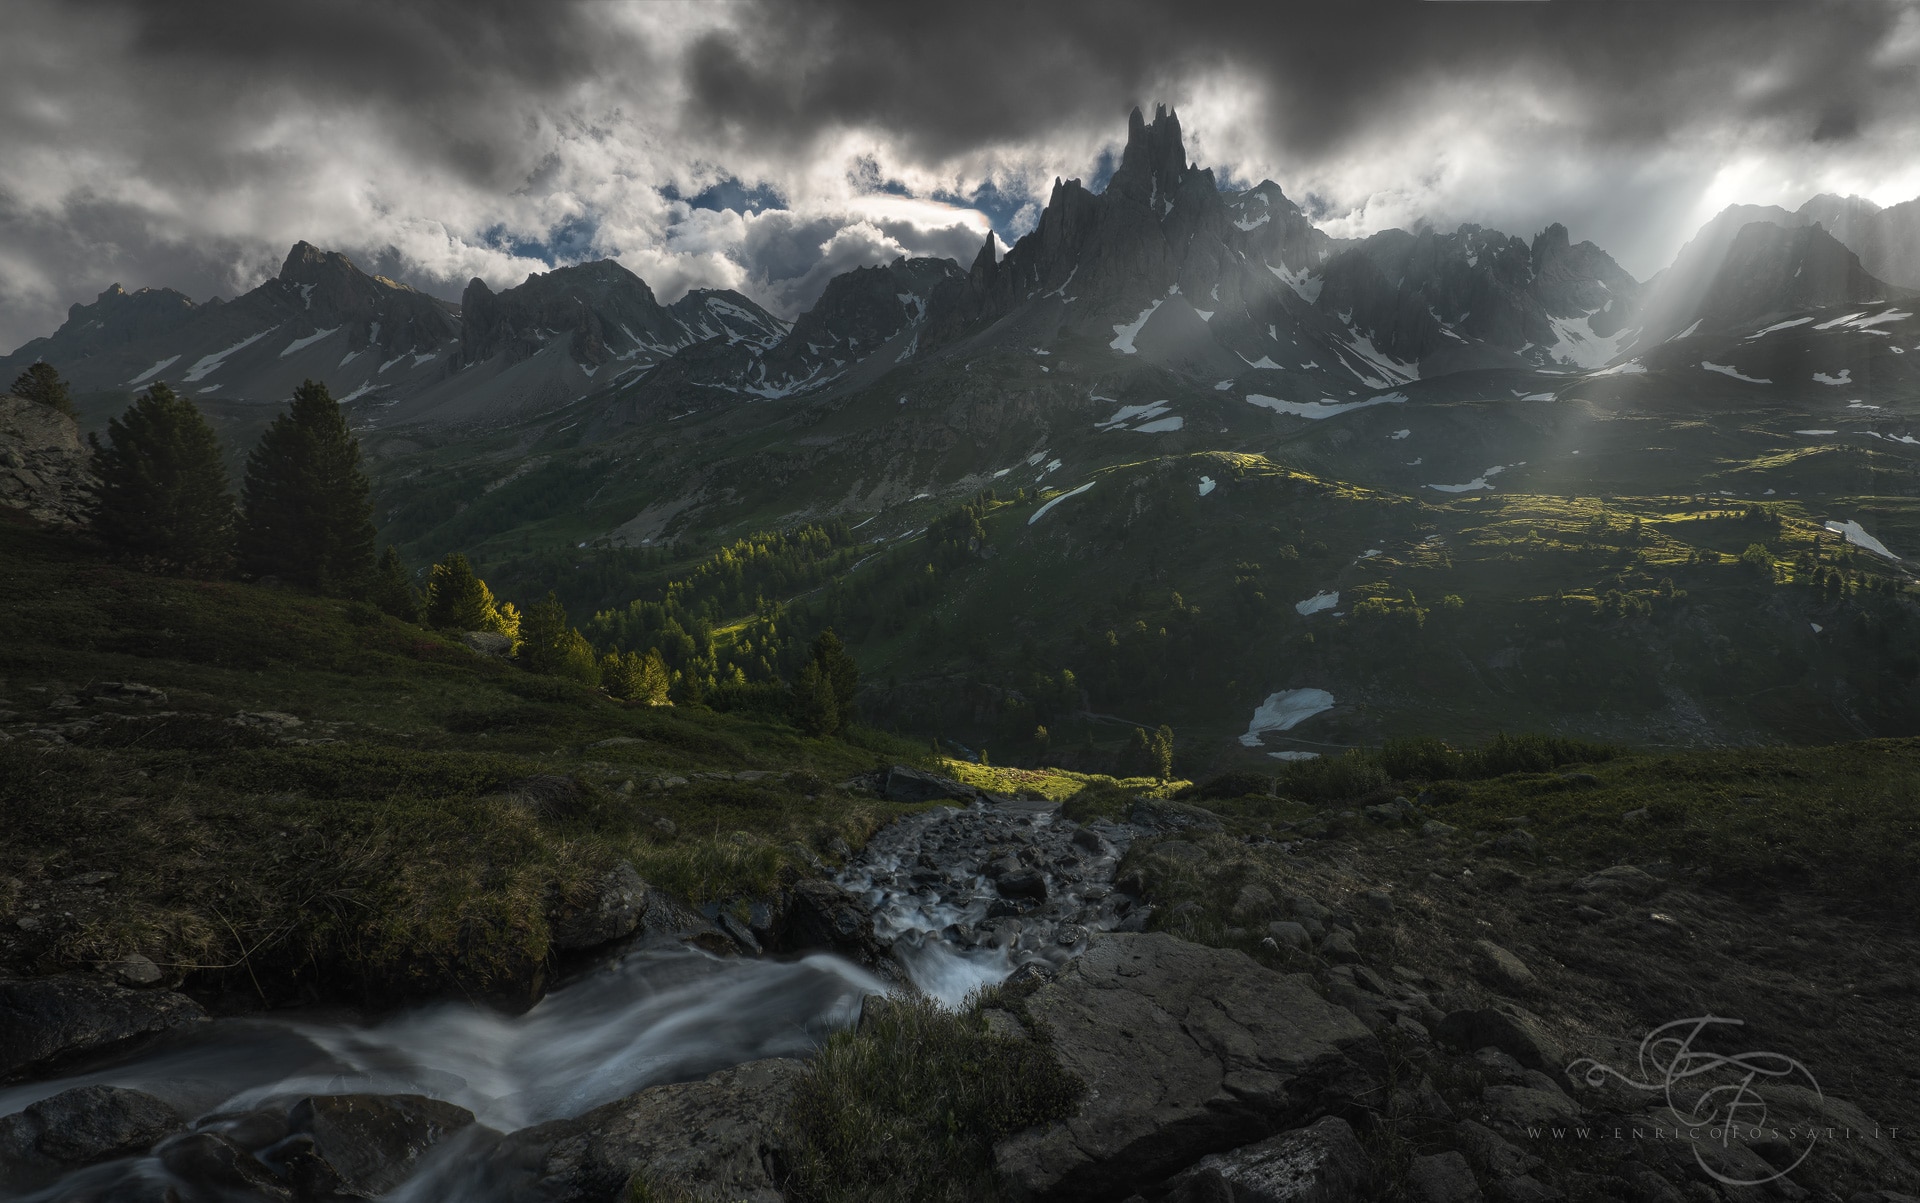 French Alps 2021 - Photography Workshops by Erin Babnik